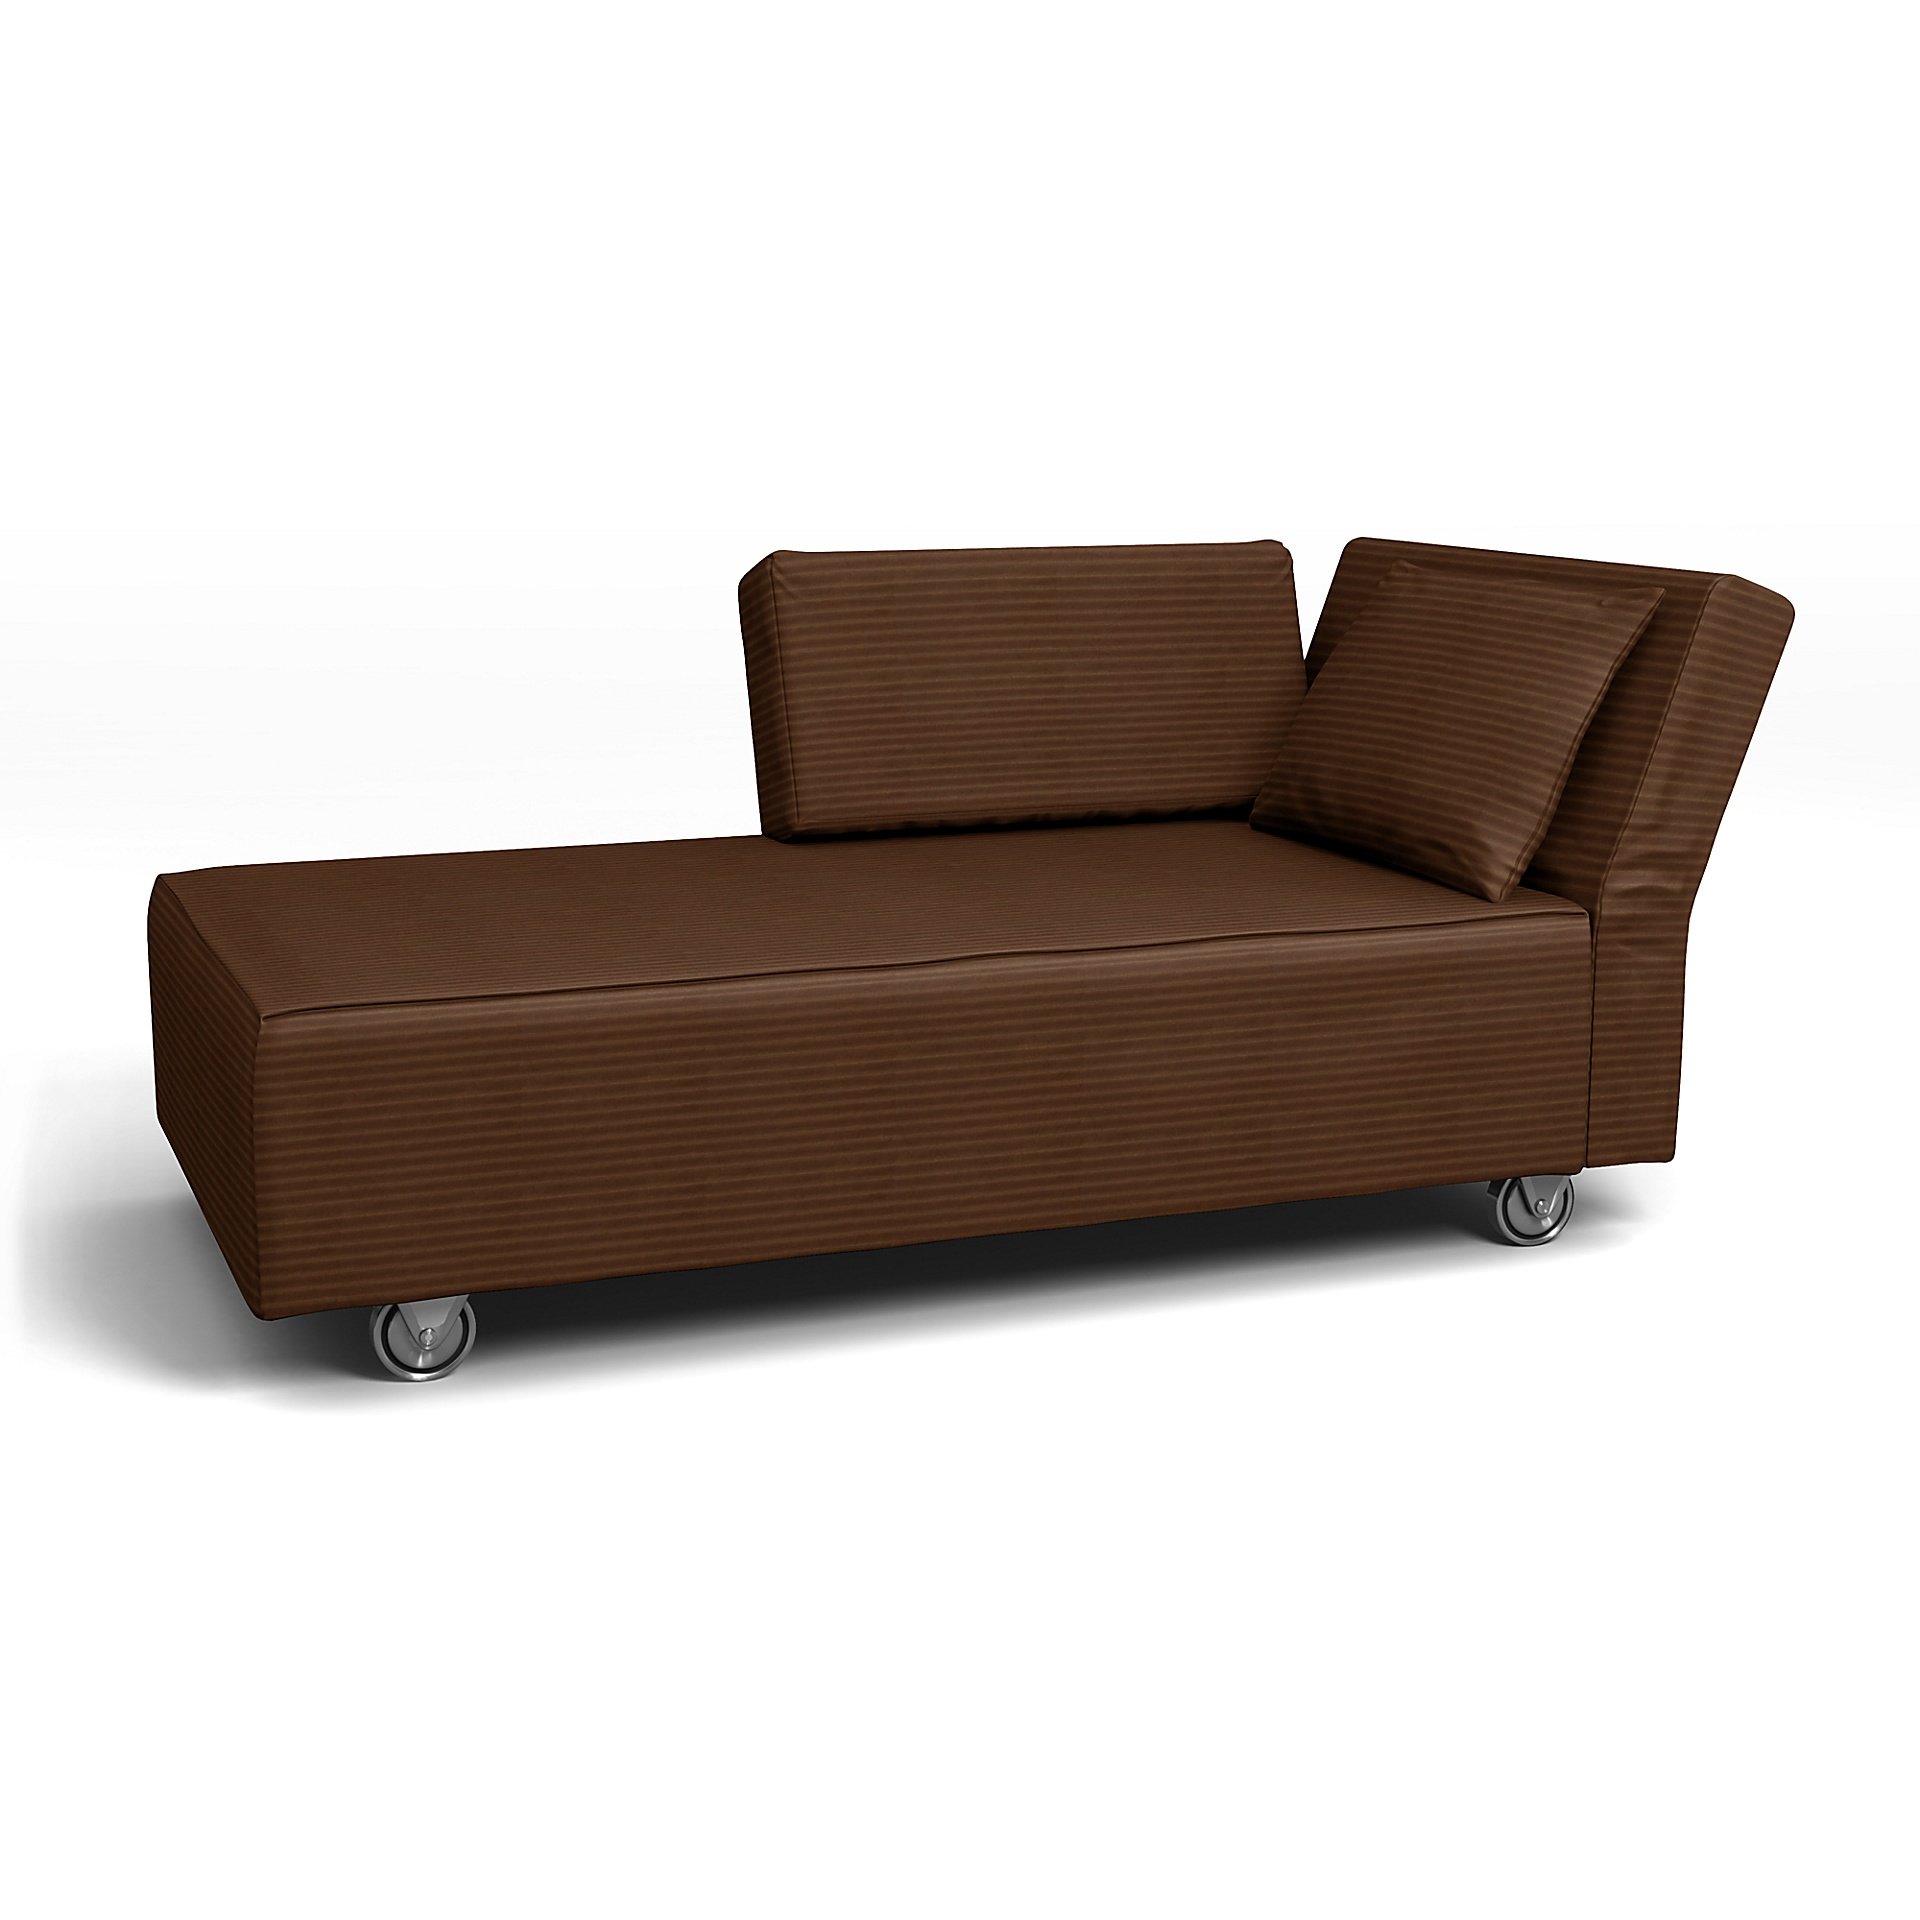 IKEA - Falsterbo Chaise with Right Armrest Cover, Chocolate Brown, Corduroy - Bemz